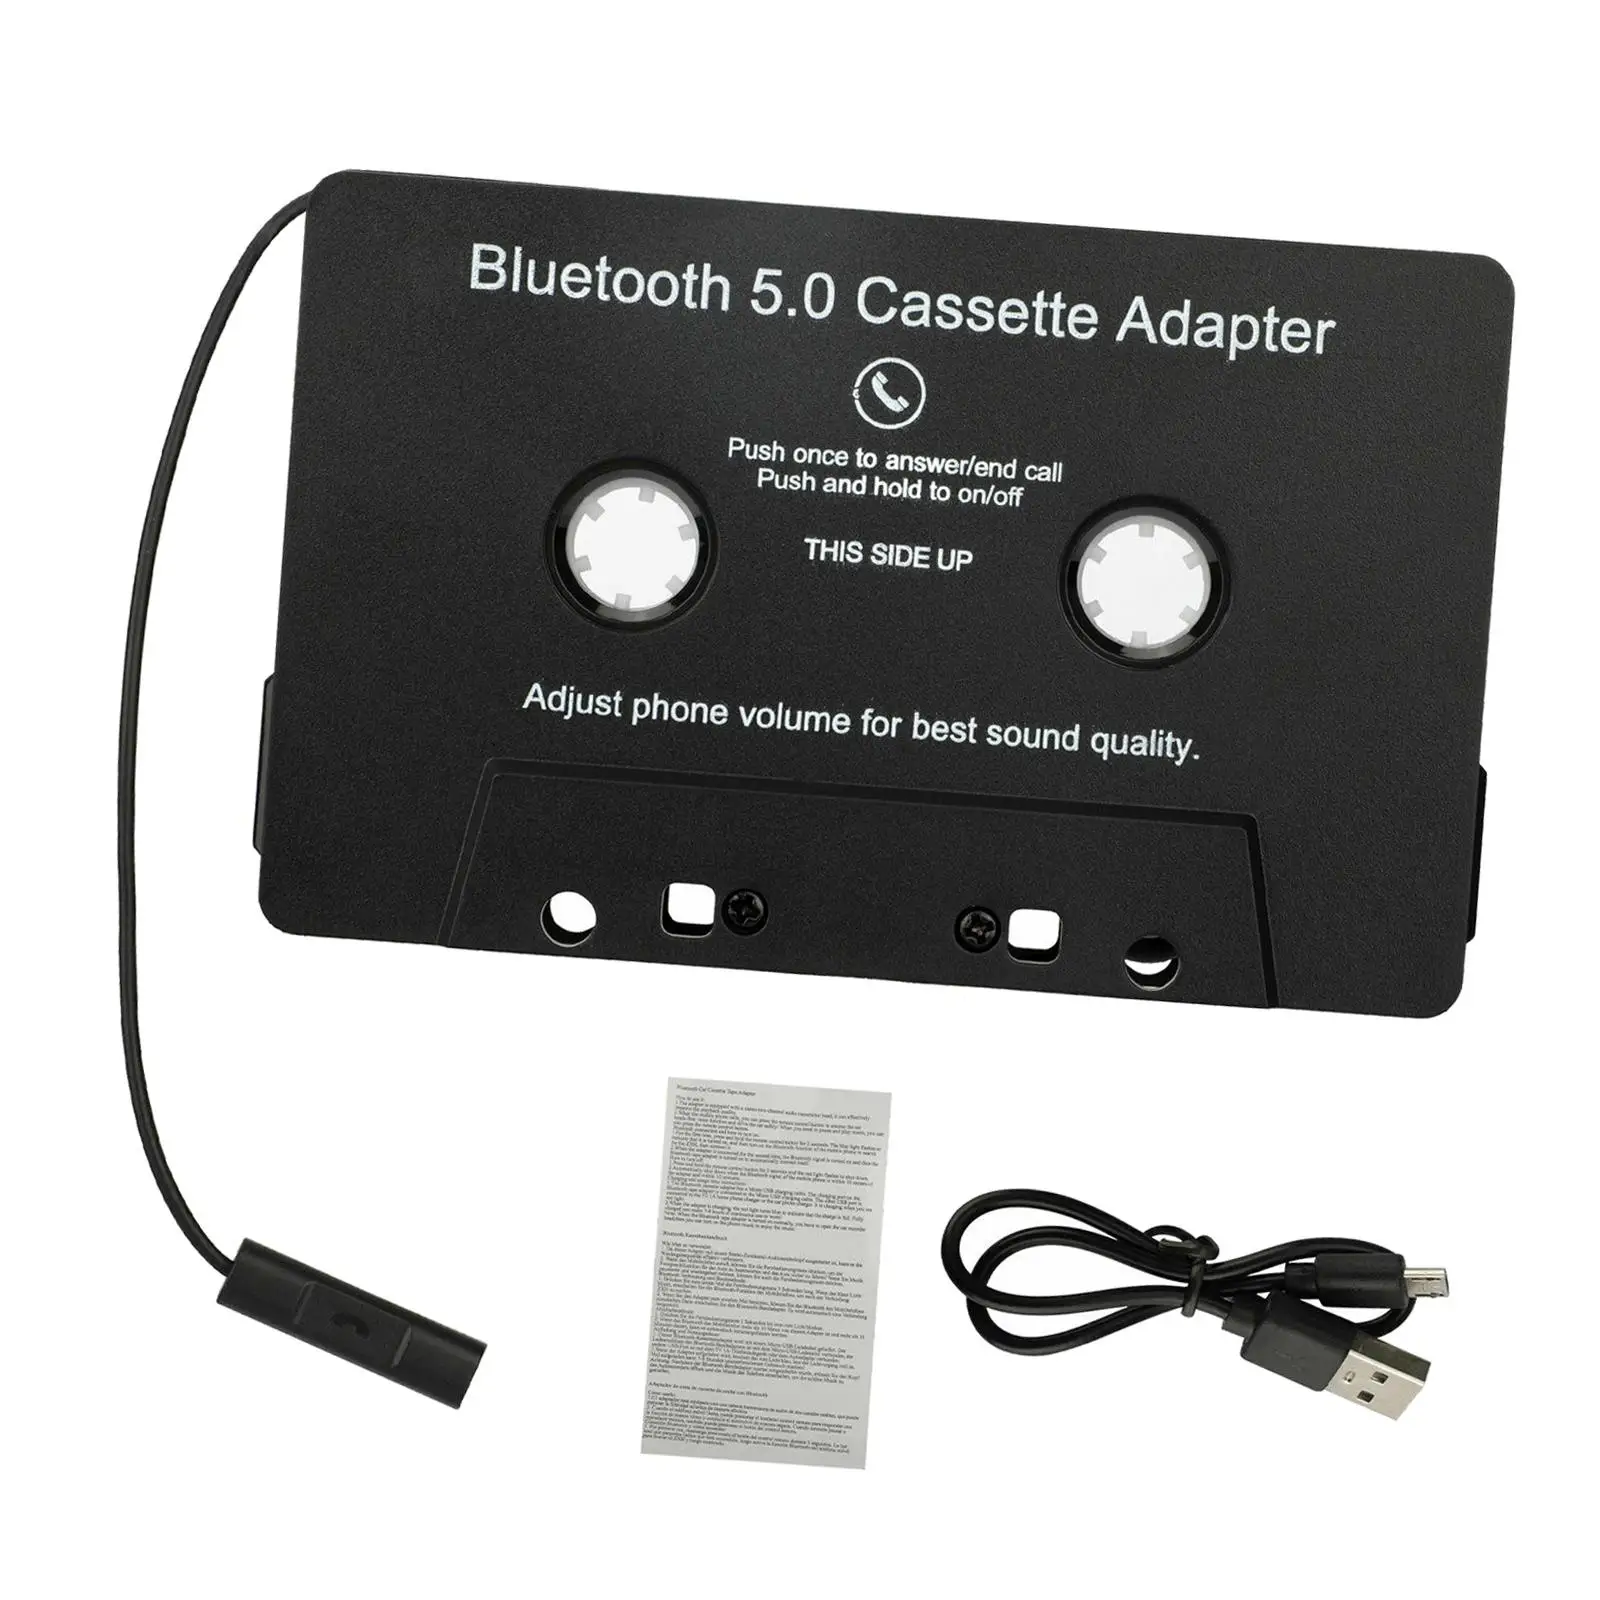 None to Aux Adapter with Stereo Audio Premium None Tape to Aux Adapter for Car, Boombox, Stereo, RV